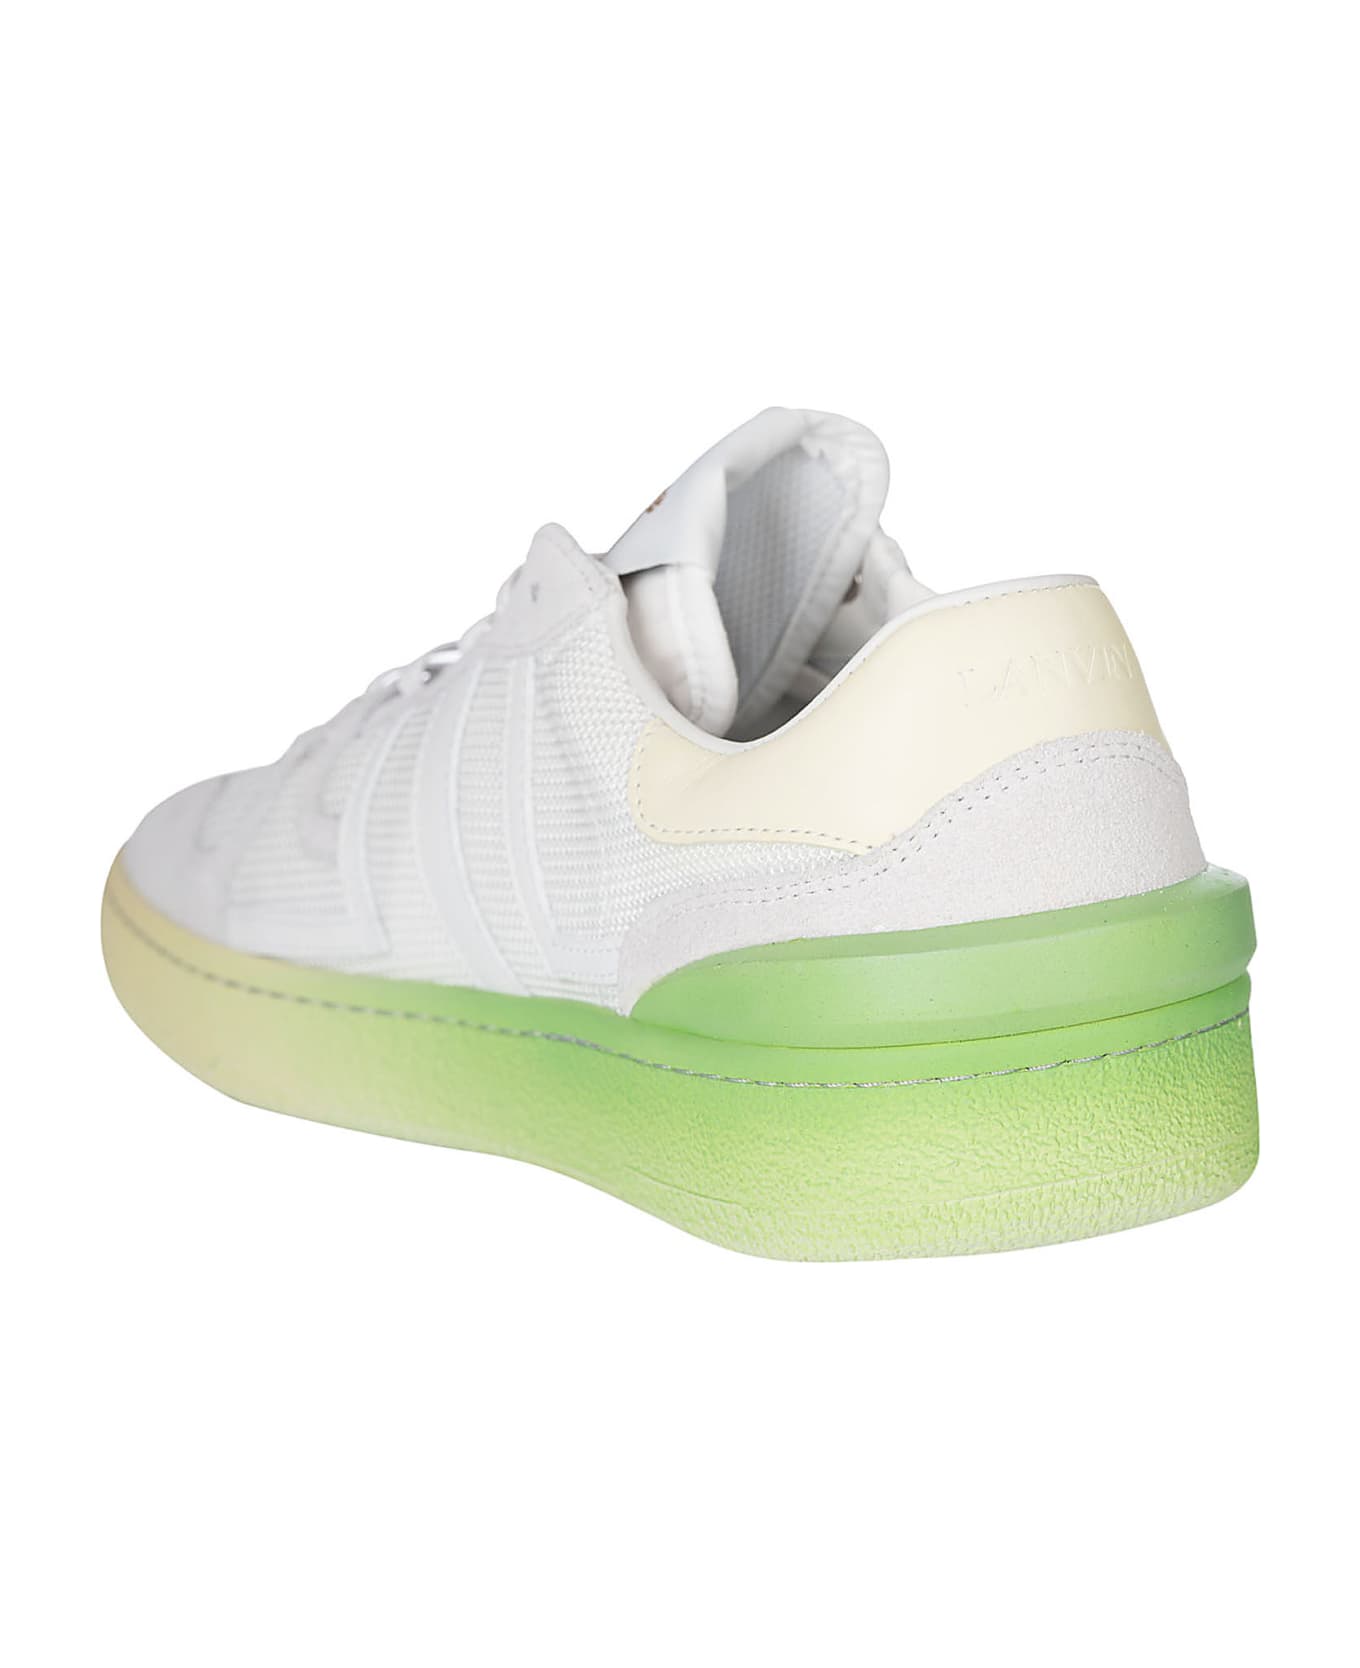 Lanvin Clay Low Top Sneakers - White/Yellow スニーカー